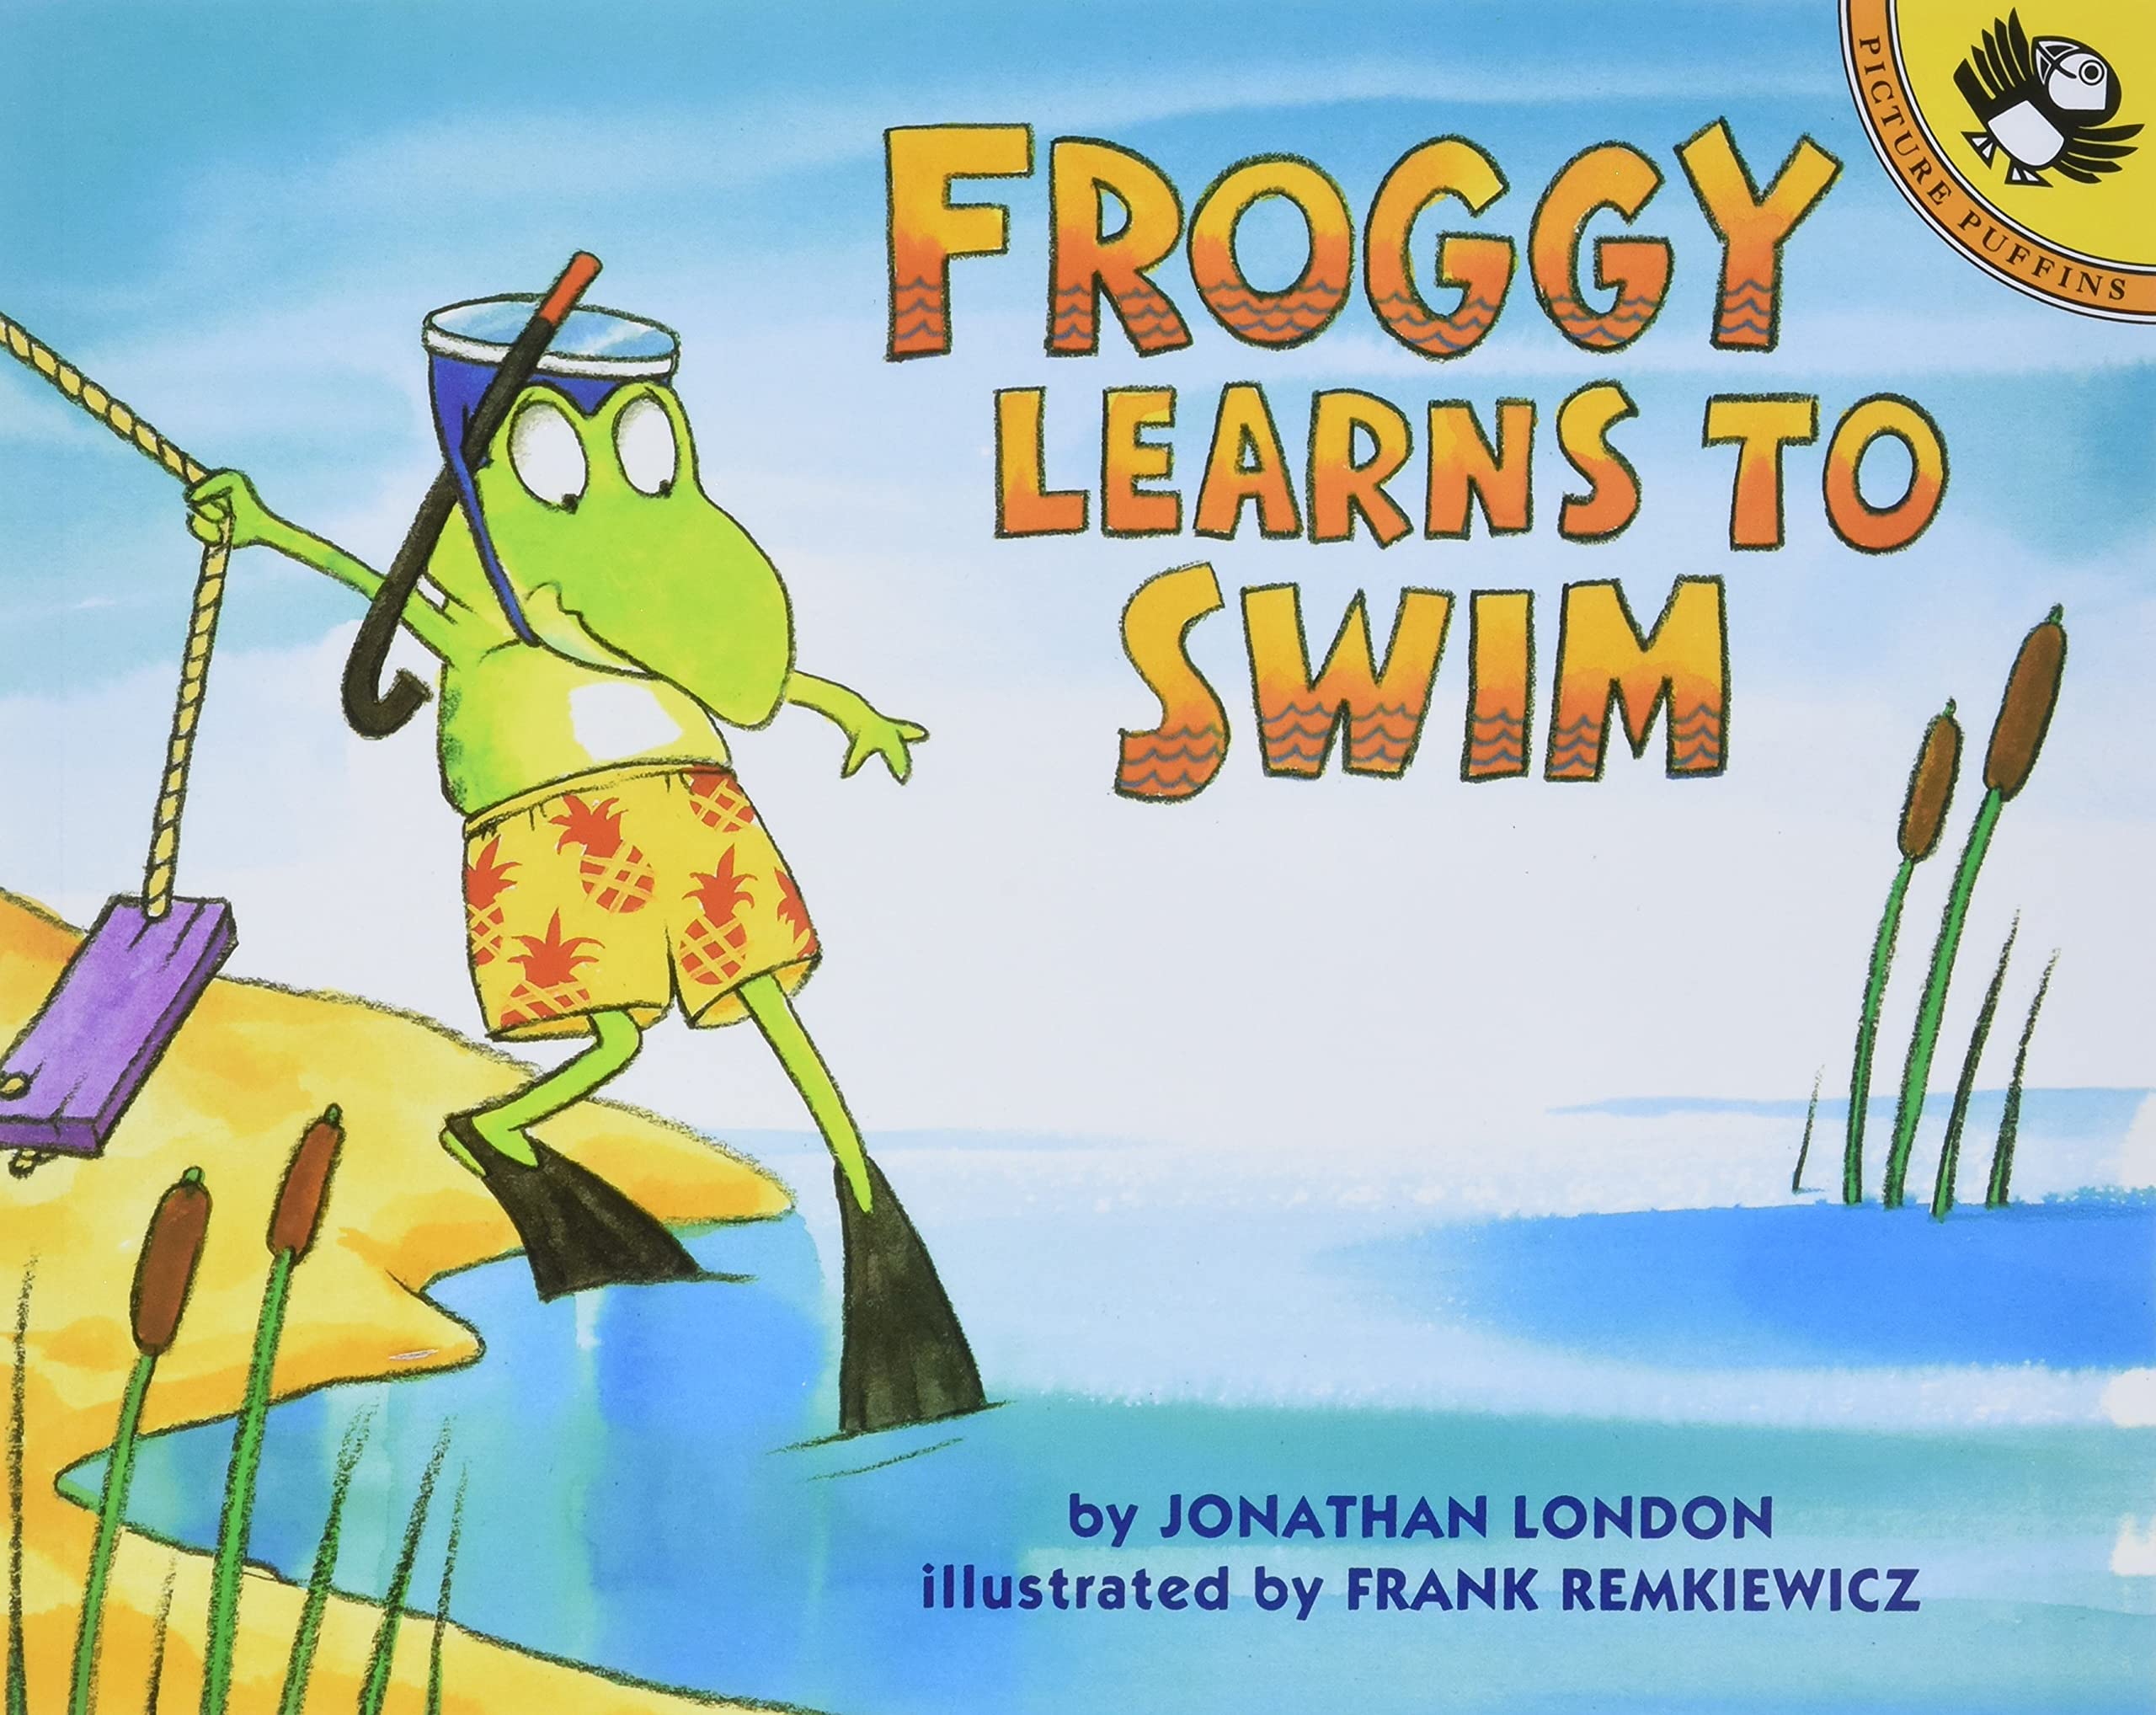 speech and language teaching concepts for Froggy Learns to Swim in speech therapy